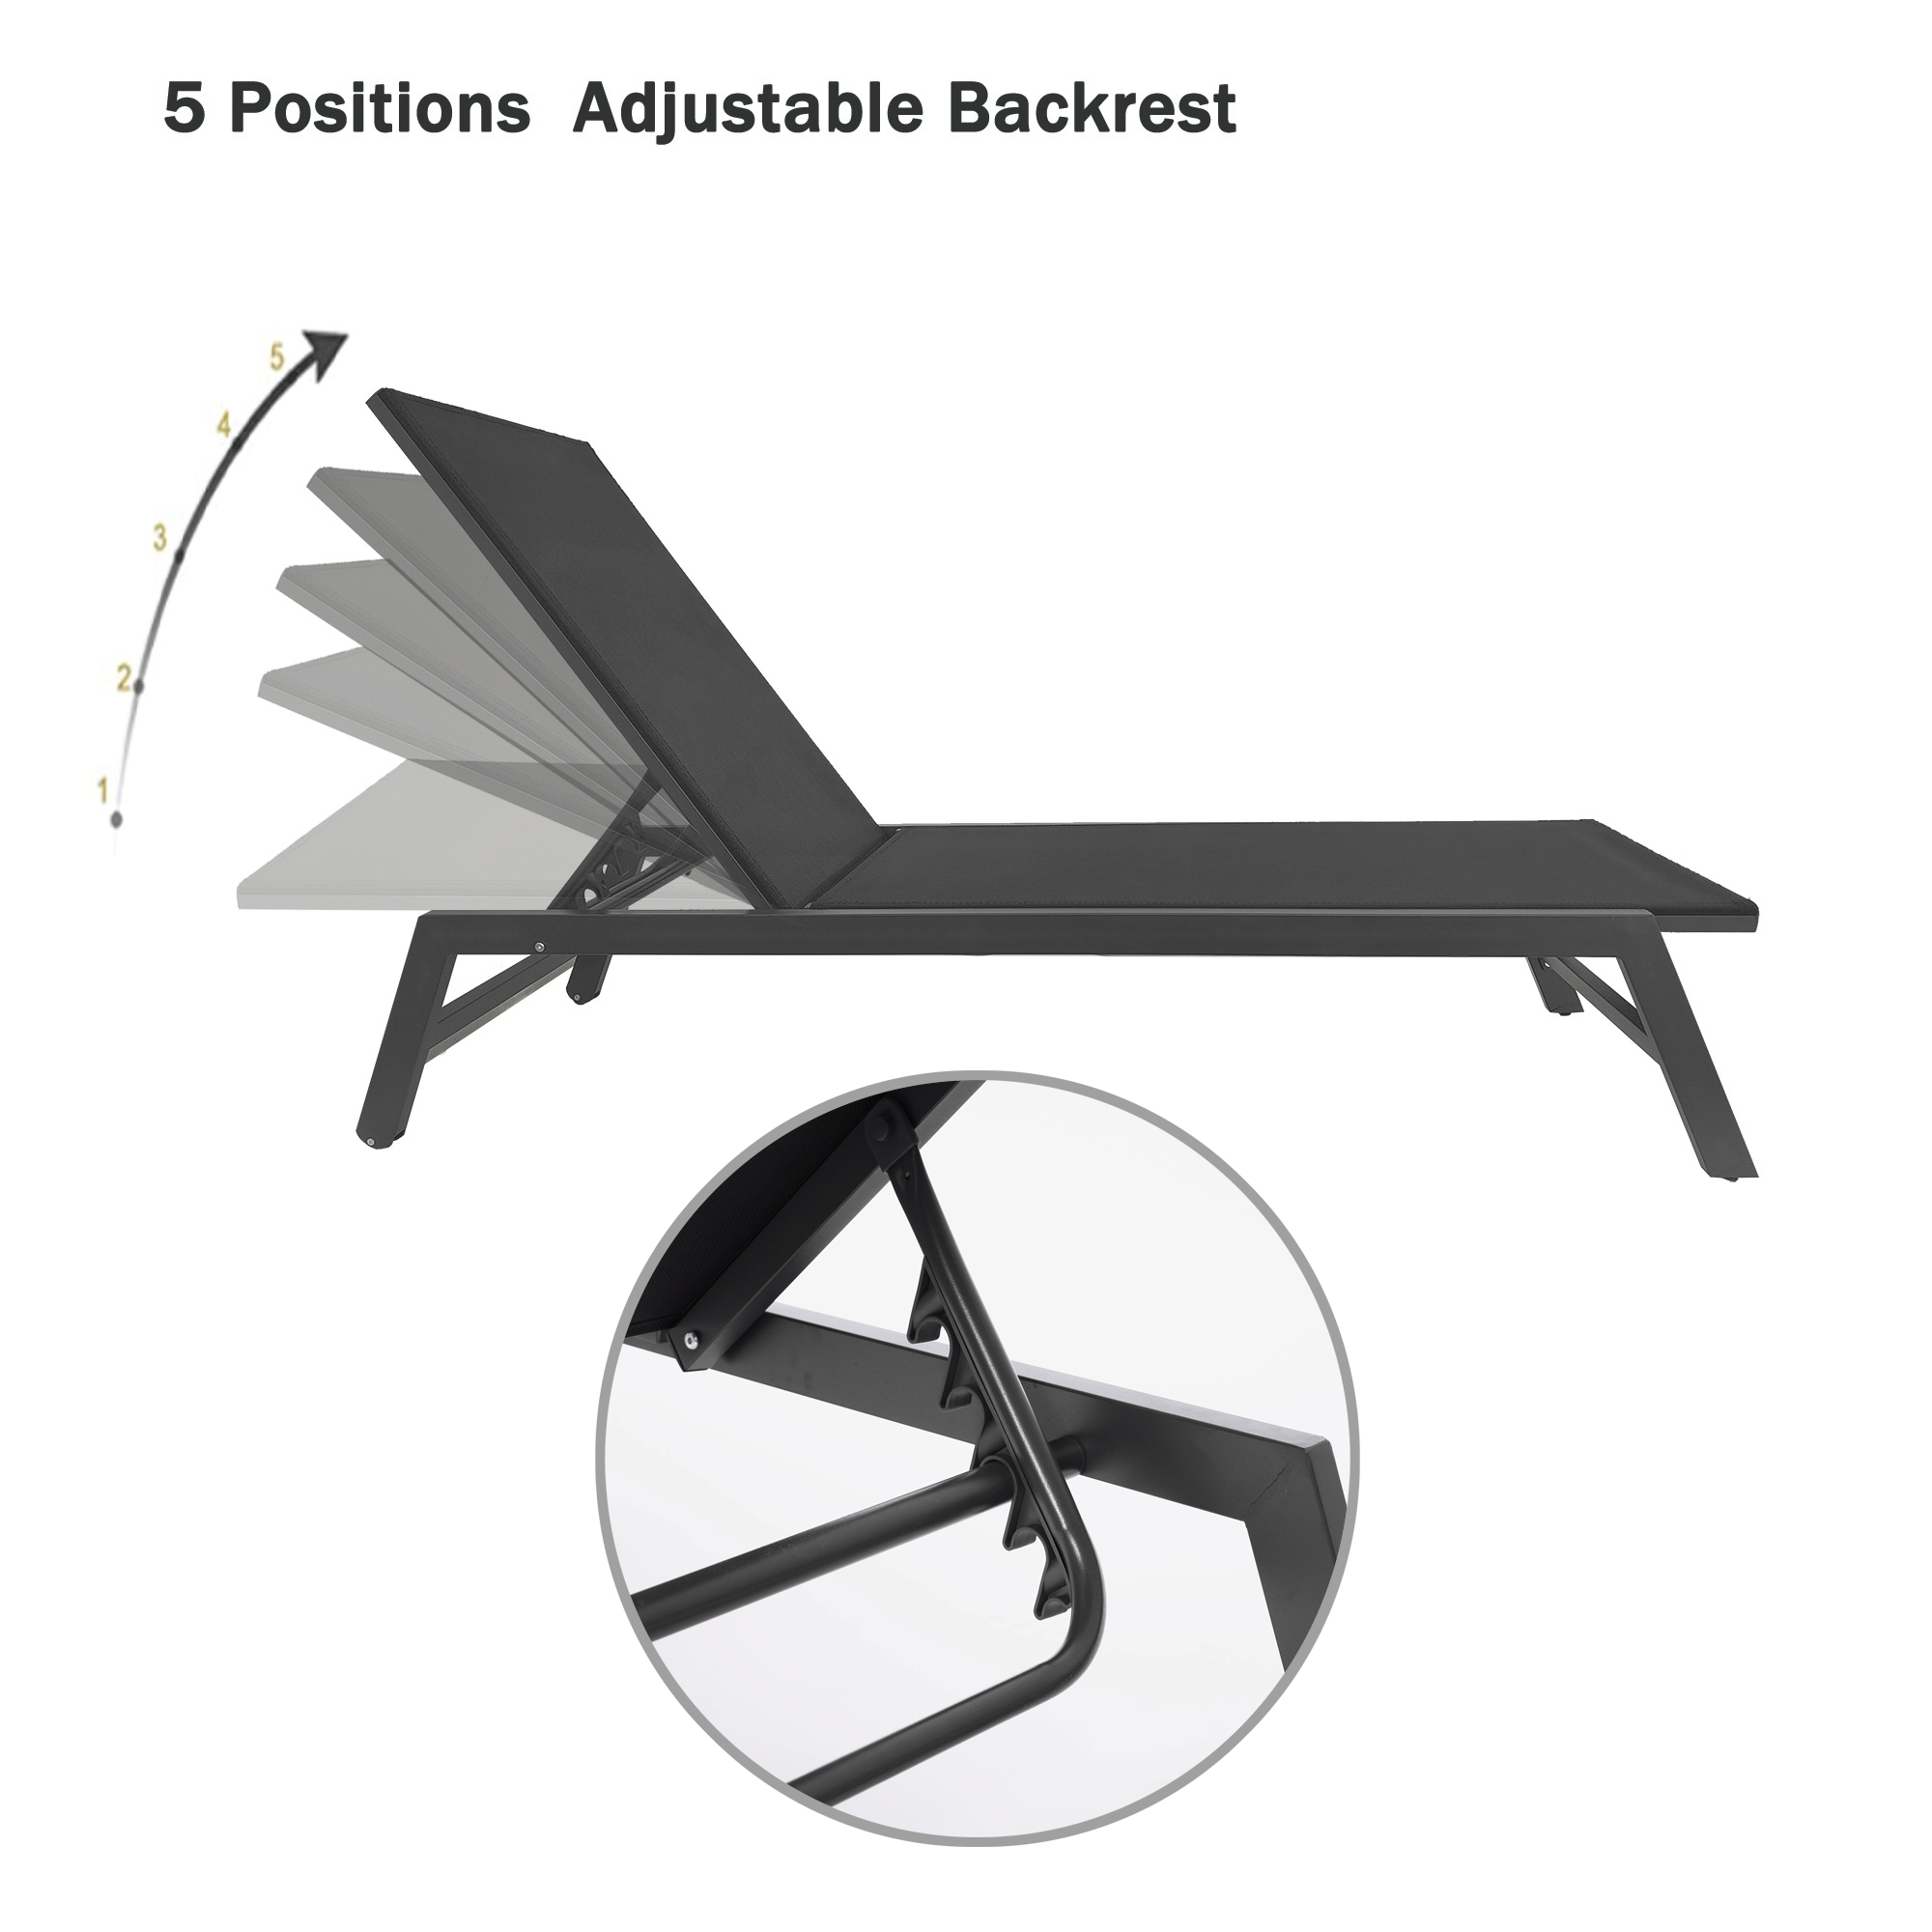 Seizeen Outdoor Chaise Lounge Chair, Five-Position Adjustable Patio Lounge Chair for Poolside Deck Porch Backyard, Black Aluminum Frame Furniture Set with Wheels - image 4 of 11